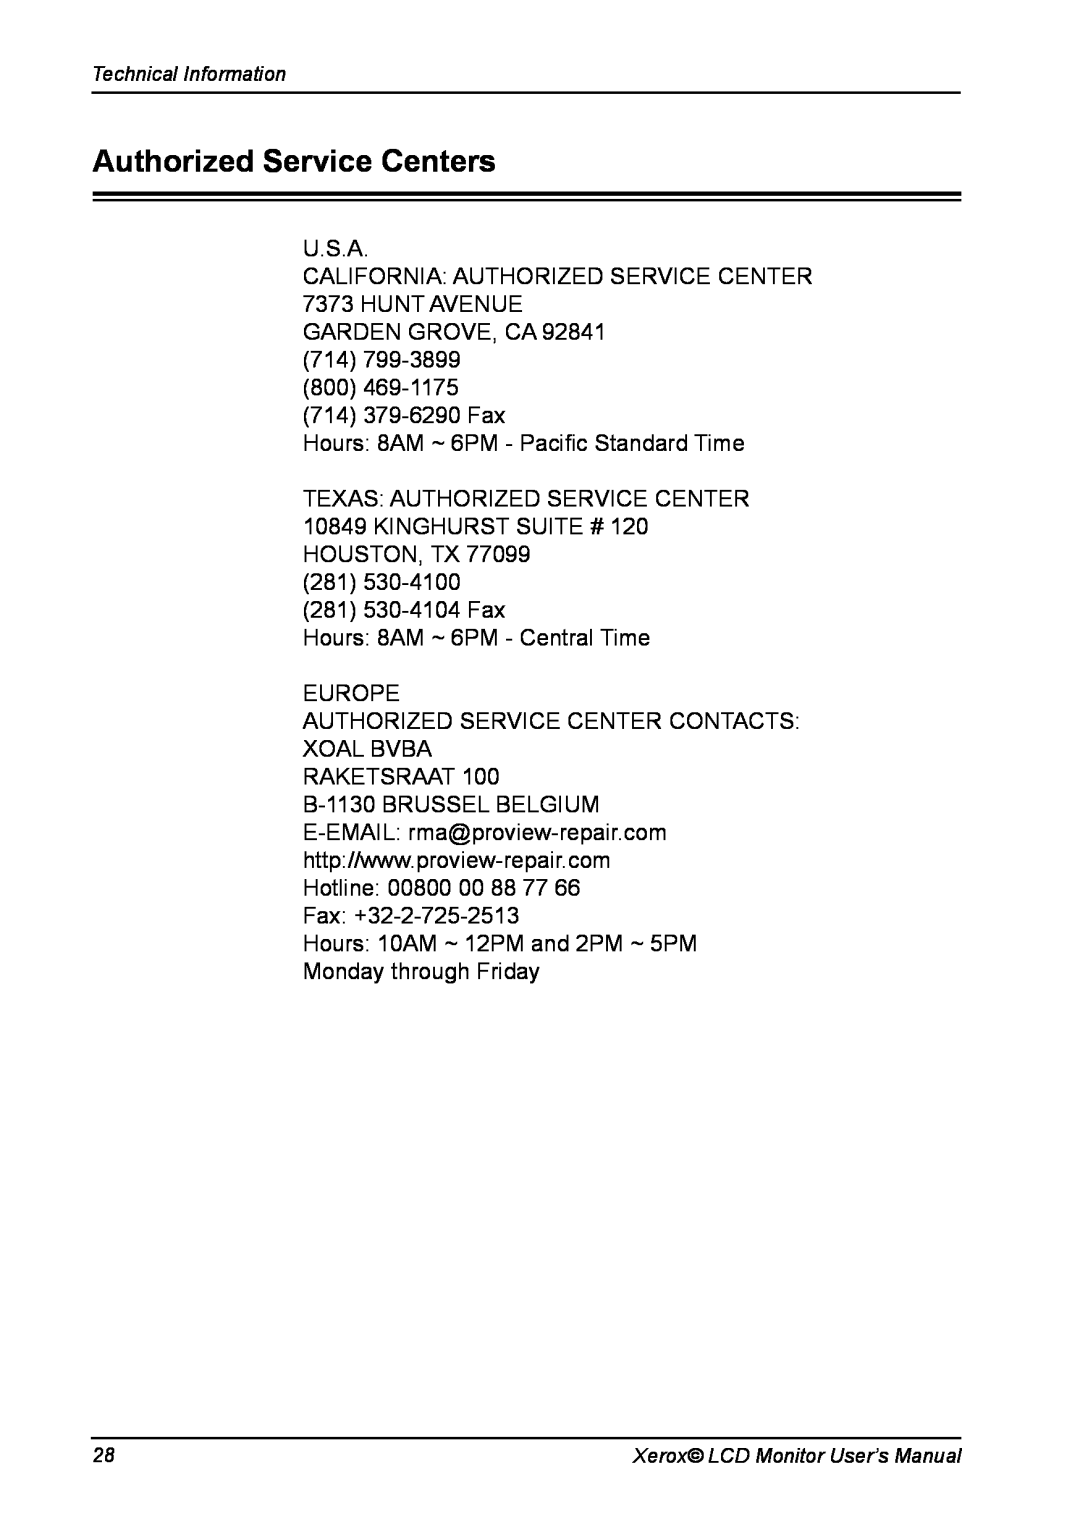 Xerox XR6 Series manual Authorized Service Centers 